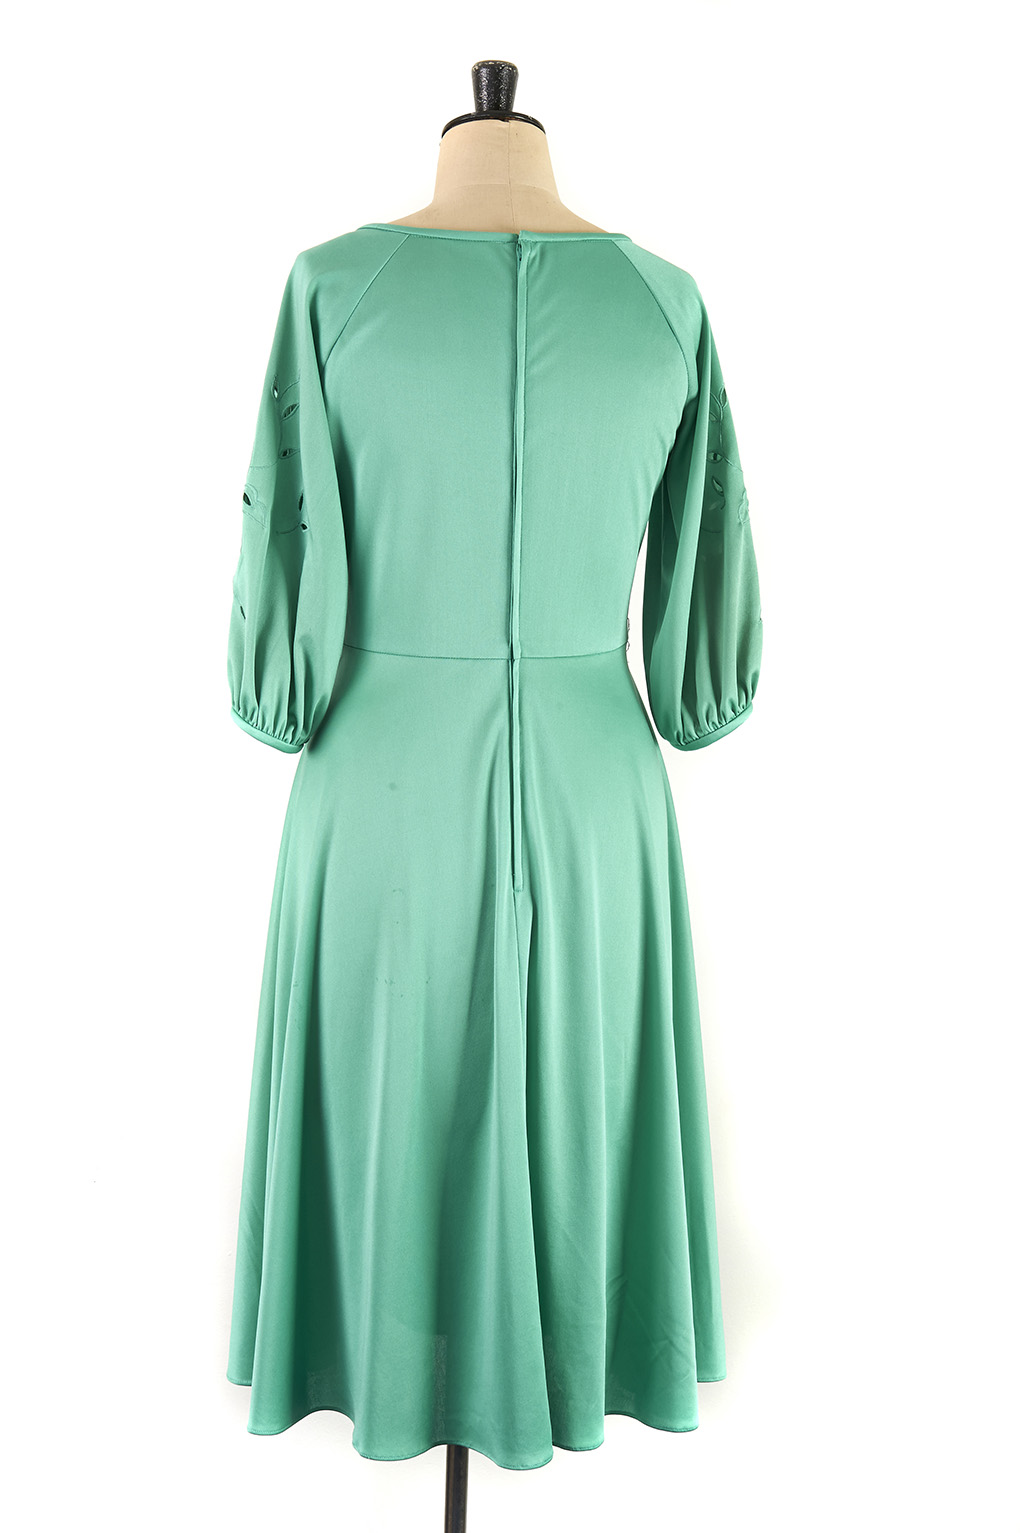 Vintage green dress with detailing on arm